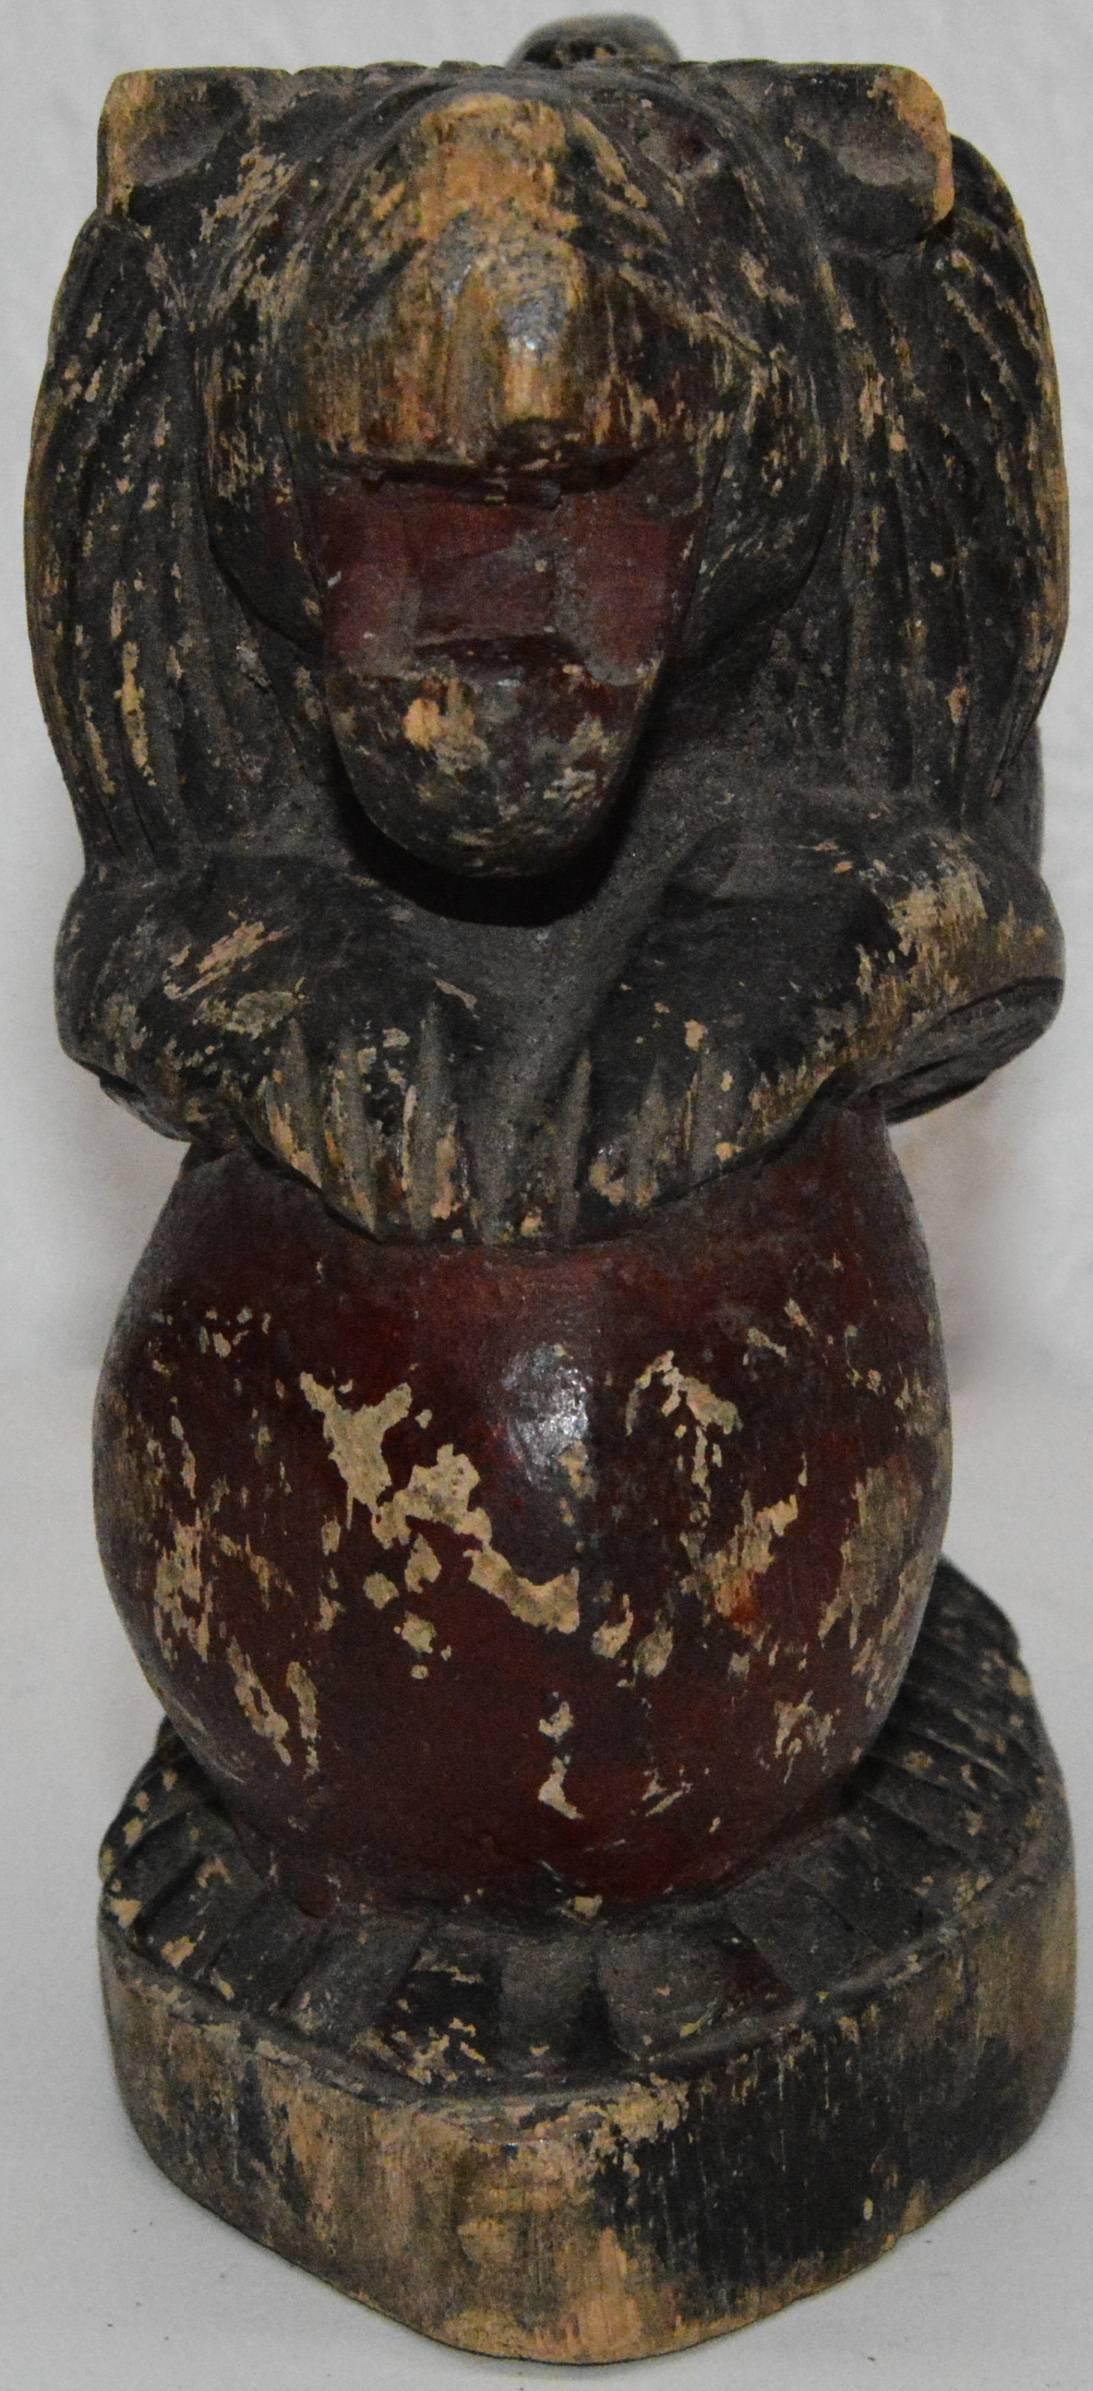 This is a unique early 19th century wooden carving depicting a stylized lion in black distressed paint, posed rampant on a red ball. Noticeable detailing to the lion’s mane, upturned tail and fluted oval base.